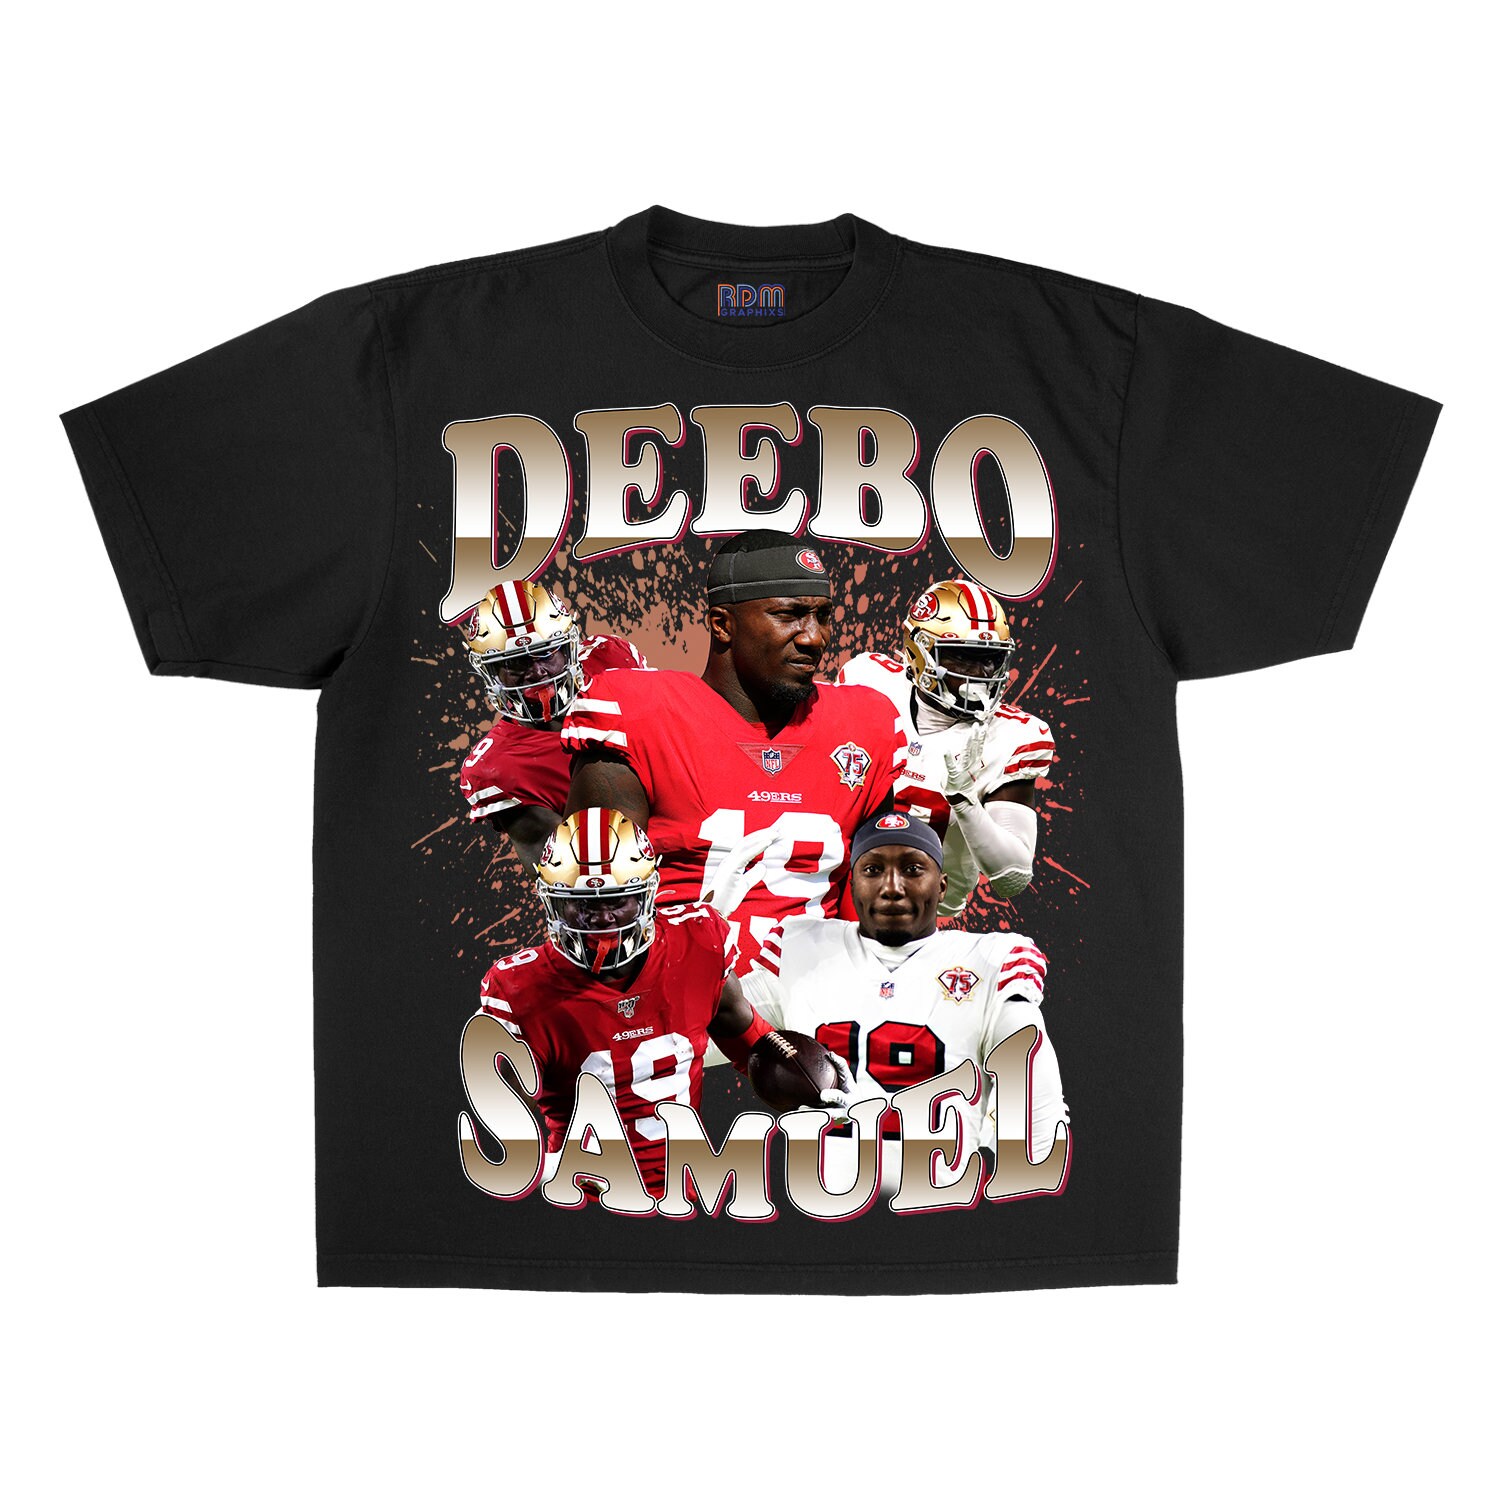 Deebo Png Jpg 49ers Png Jpg Niners Png Jpg Niner Gang Png - Etsy